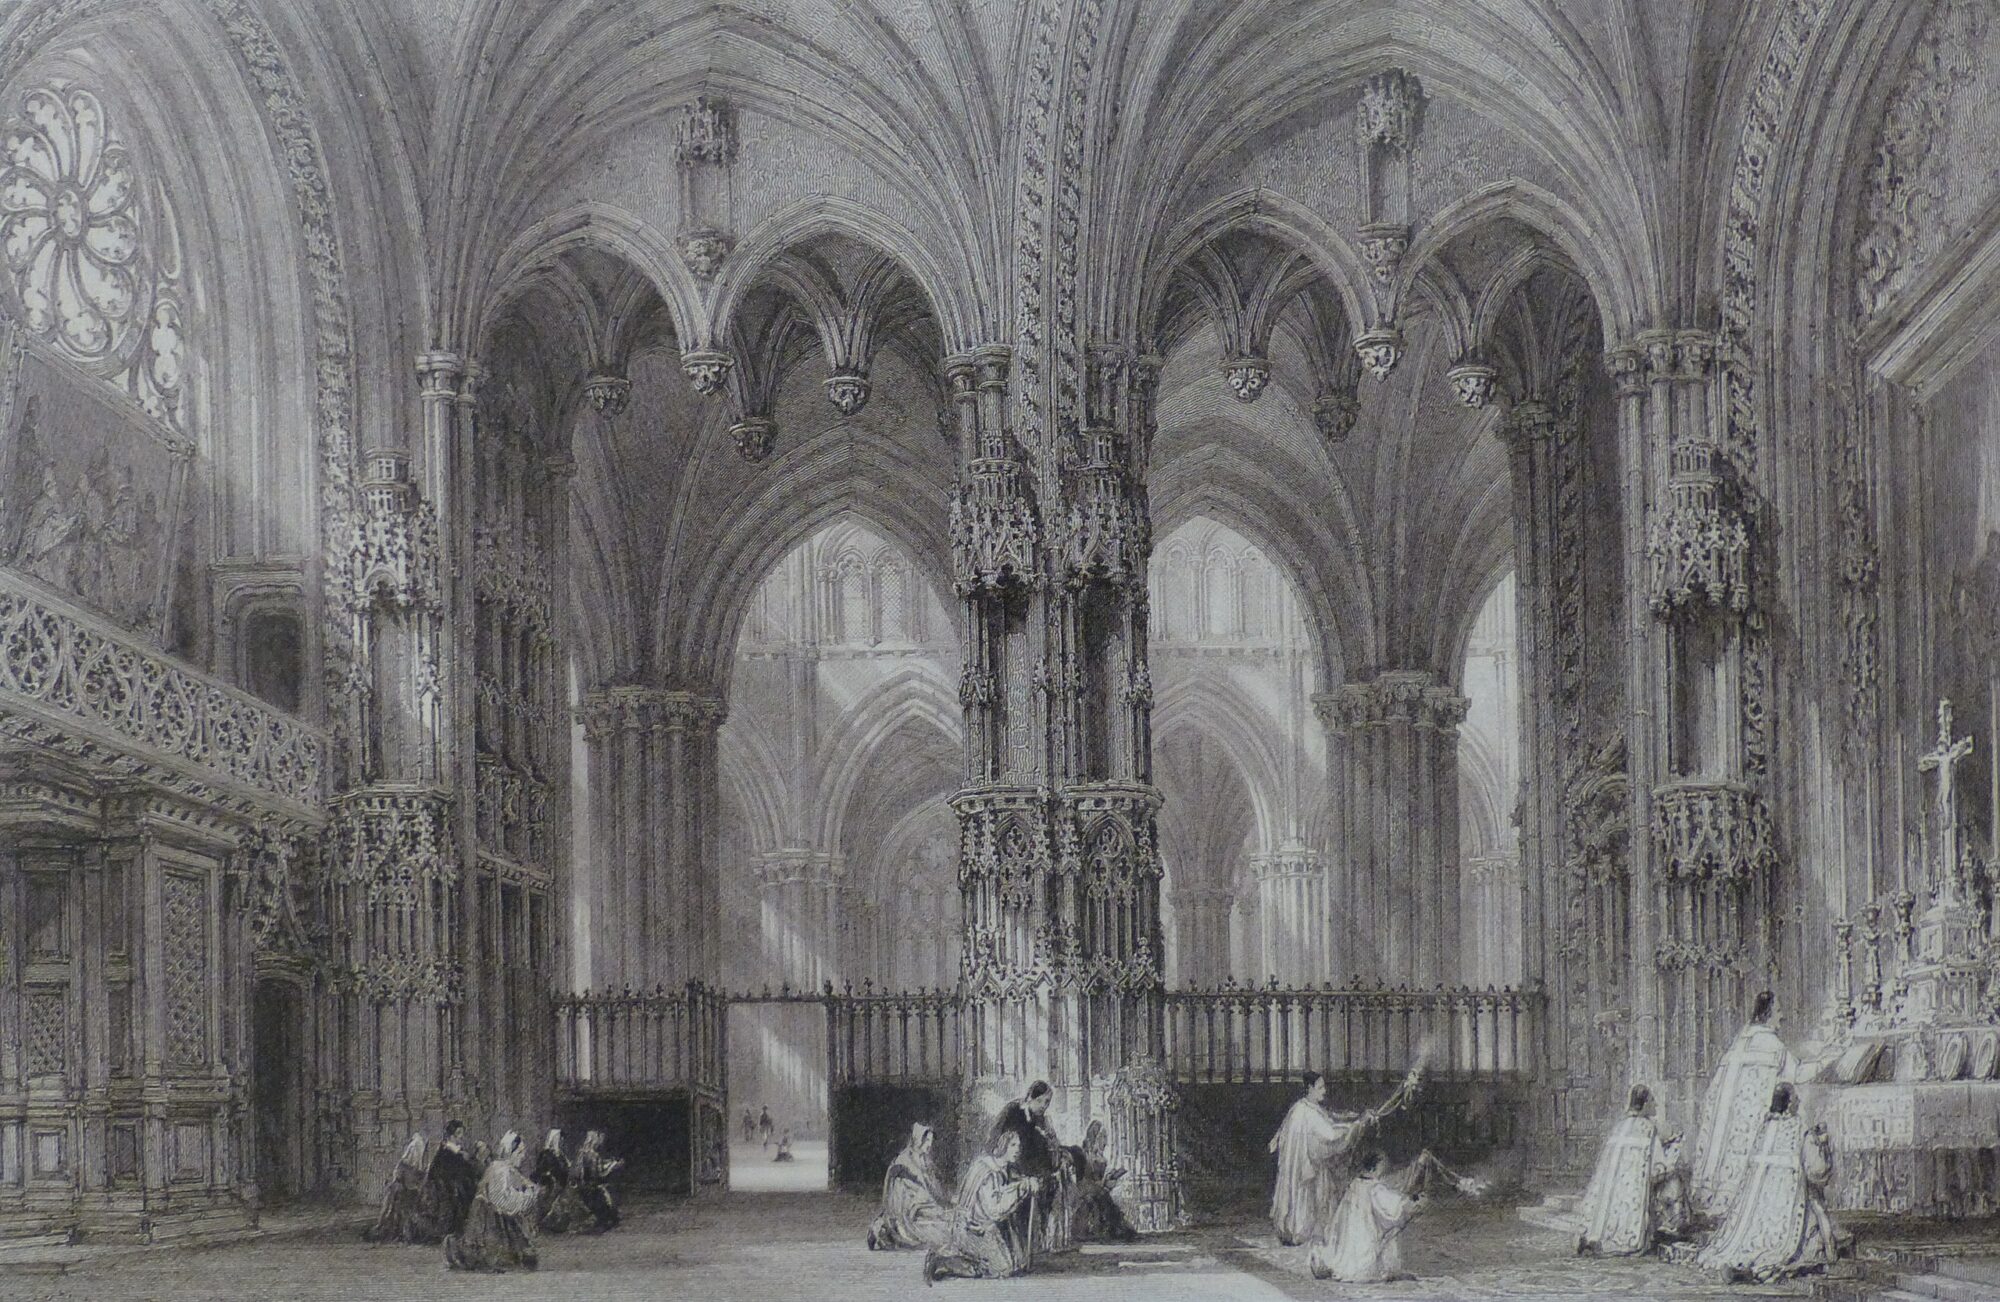 "La chapelle des Bourbons au XIXe siècle" (unknown date) an engraving by Ebenezer Challis (1806-1881) based on a drawing by Thomas Allom (1804-1872), currently located in a private collection. The chapel is a part of the Cathedral of St. John the Baptist in Lyon.